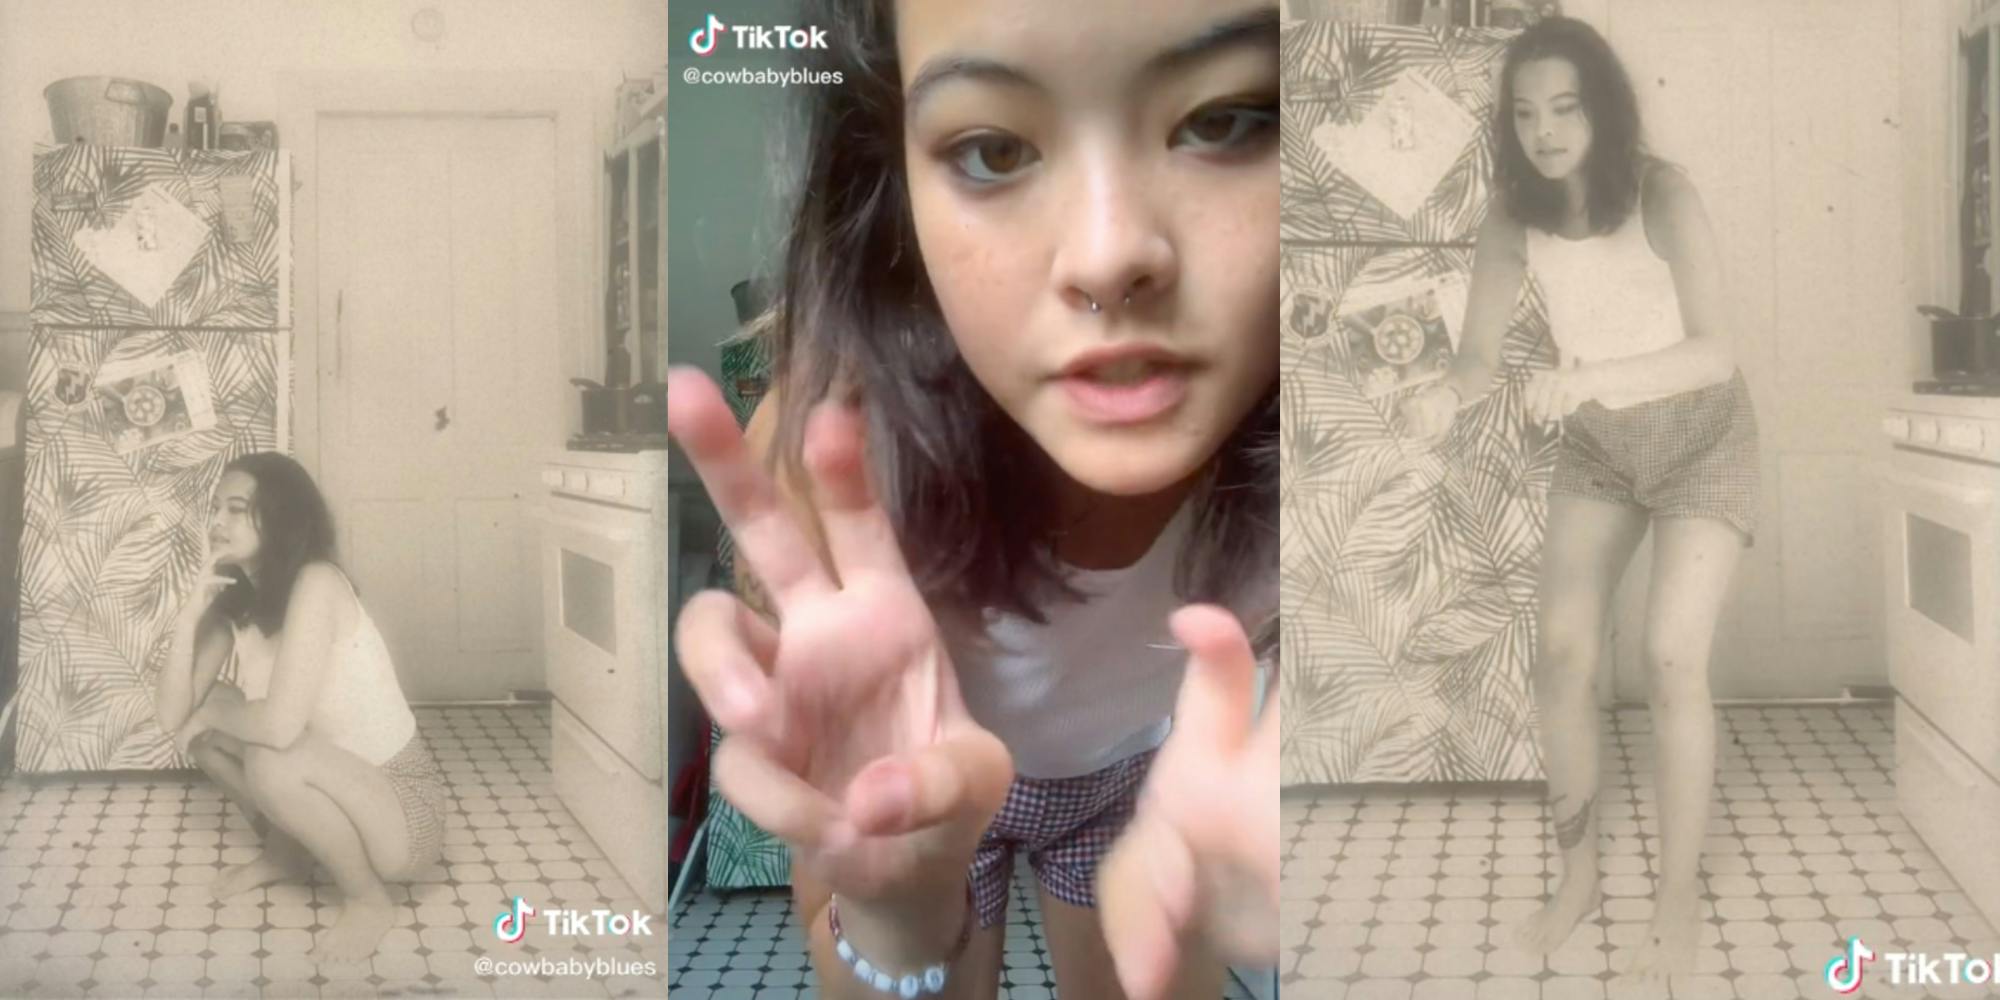 tiktok user @cowbabyblues demonstrates what a stereotypical photo of an asian person in chinatown looks like